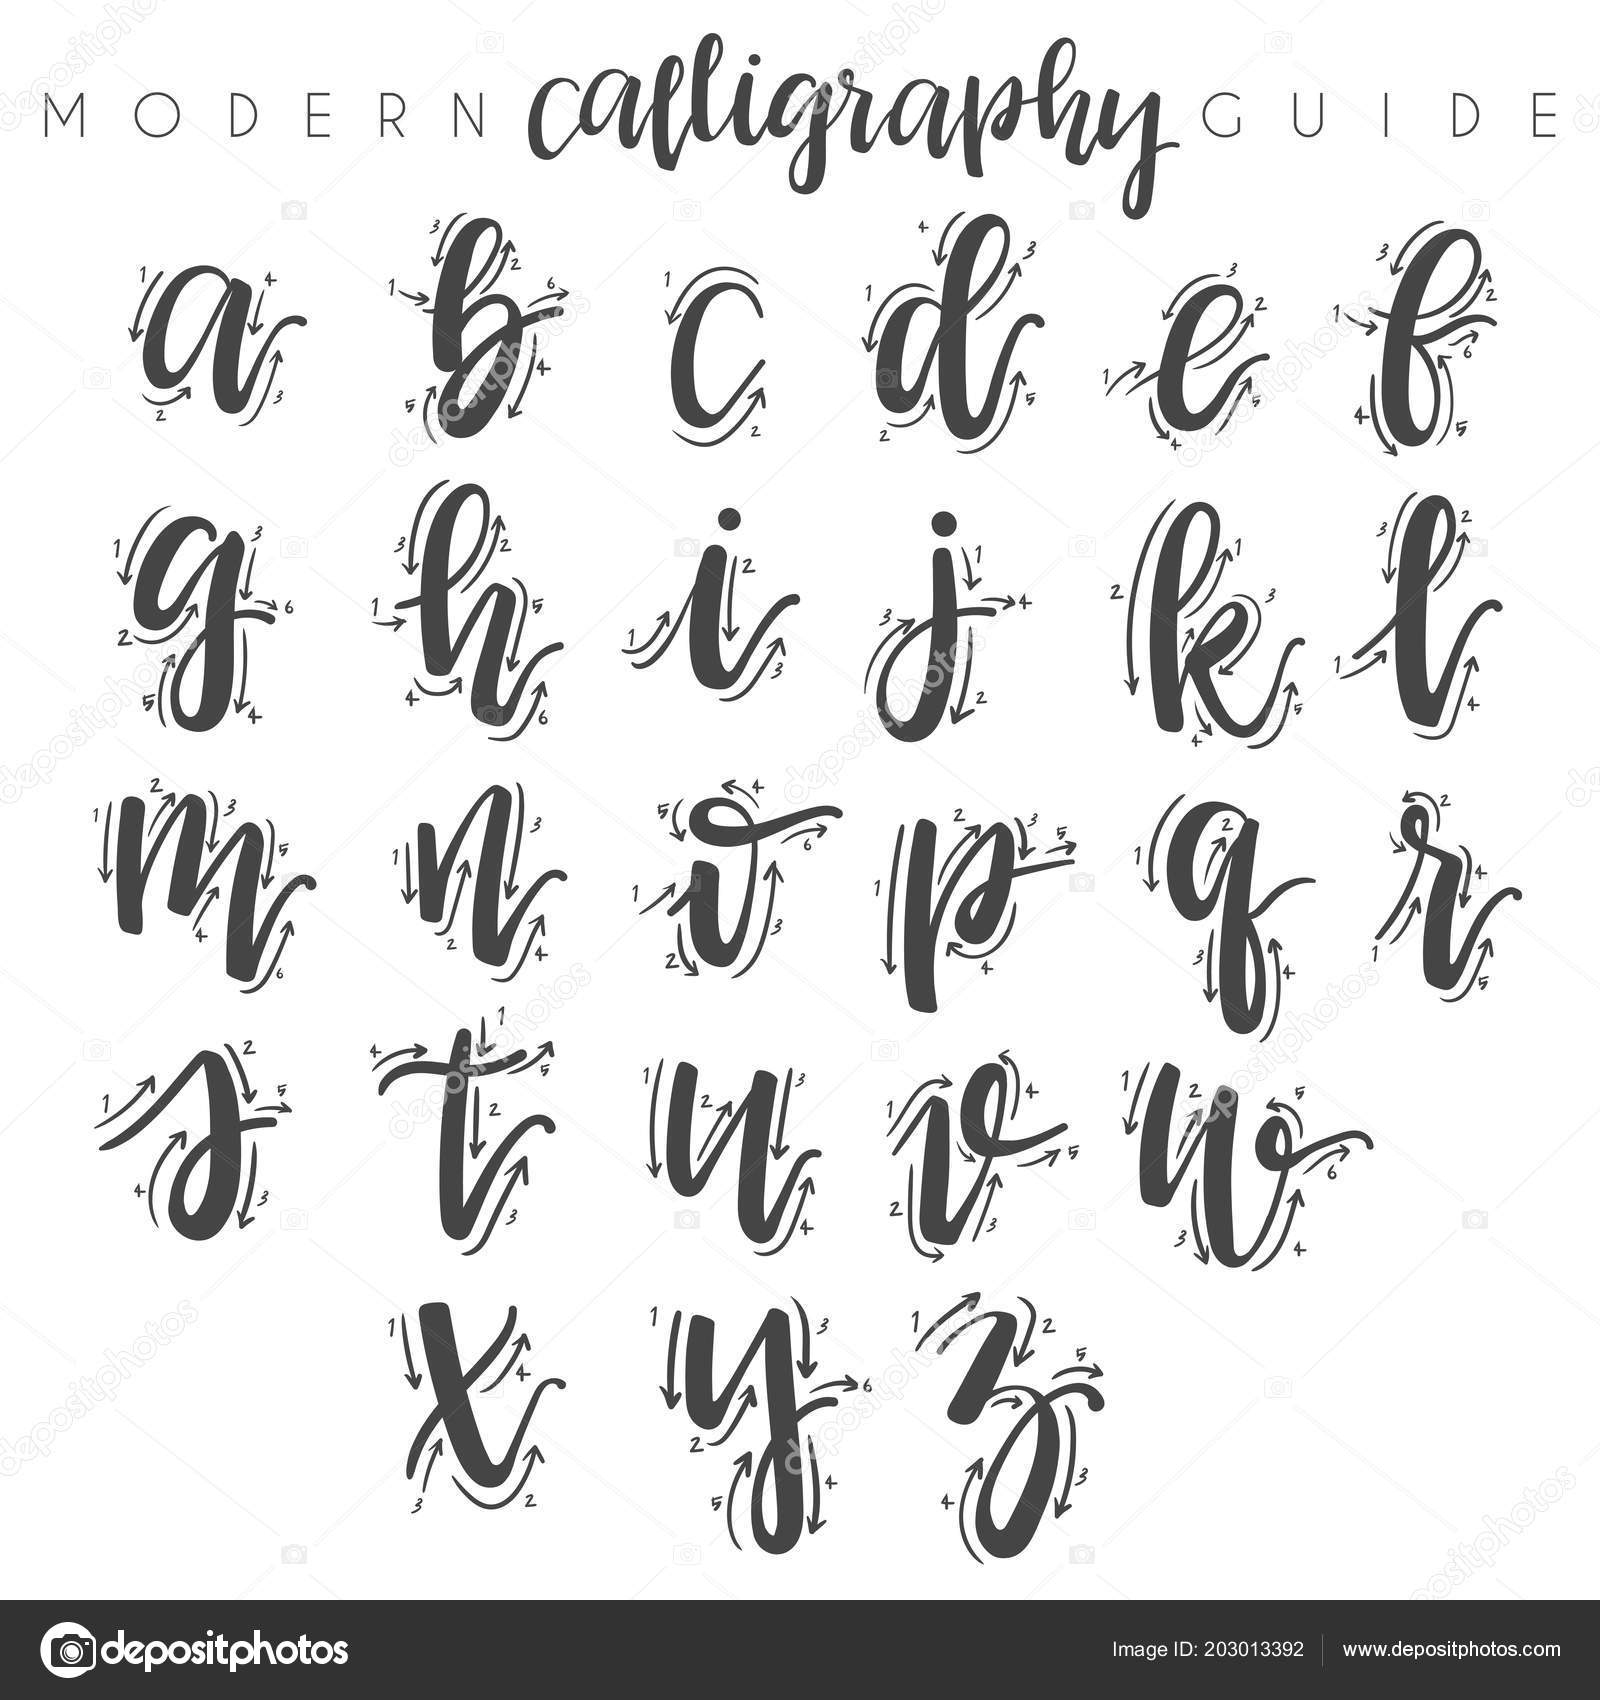 Modern Calligraphy Guide Vector Illustration Stock Vector by ©daraon  203013392